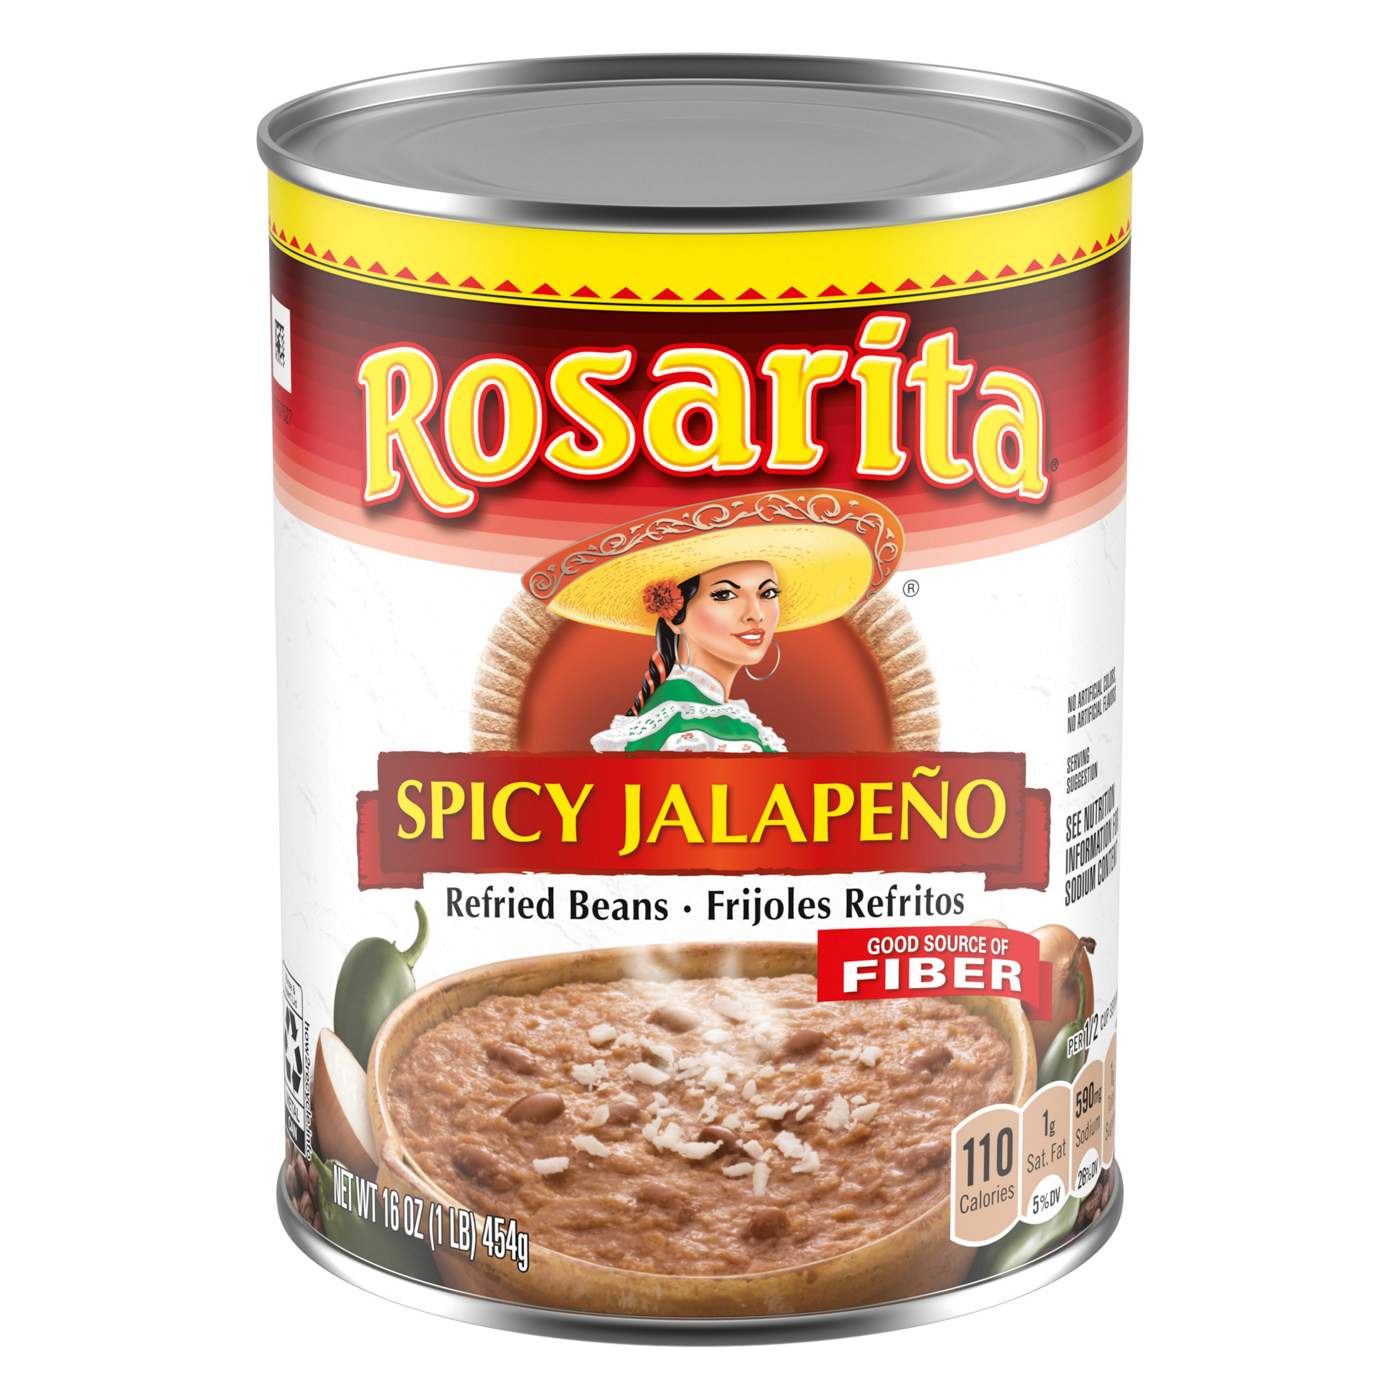 Rosarita Spicy Jalapeno Refried Beans; image 1 of 5